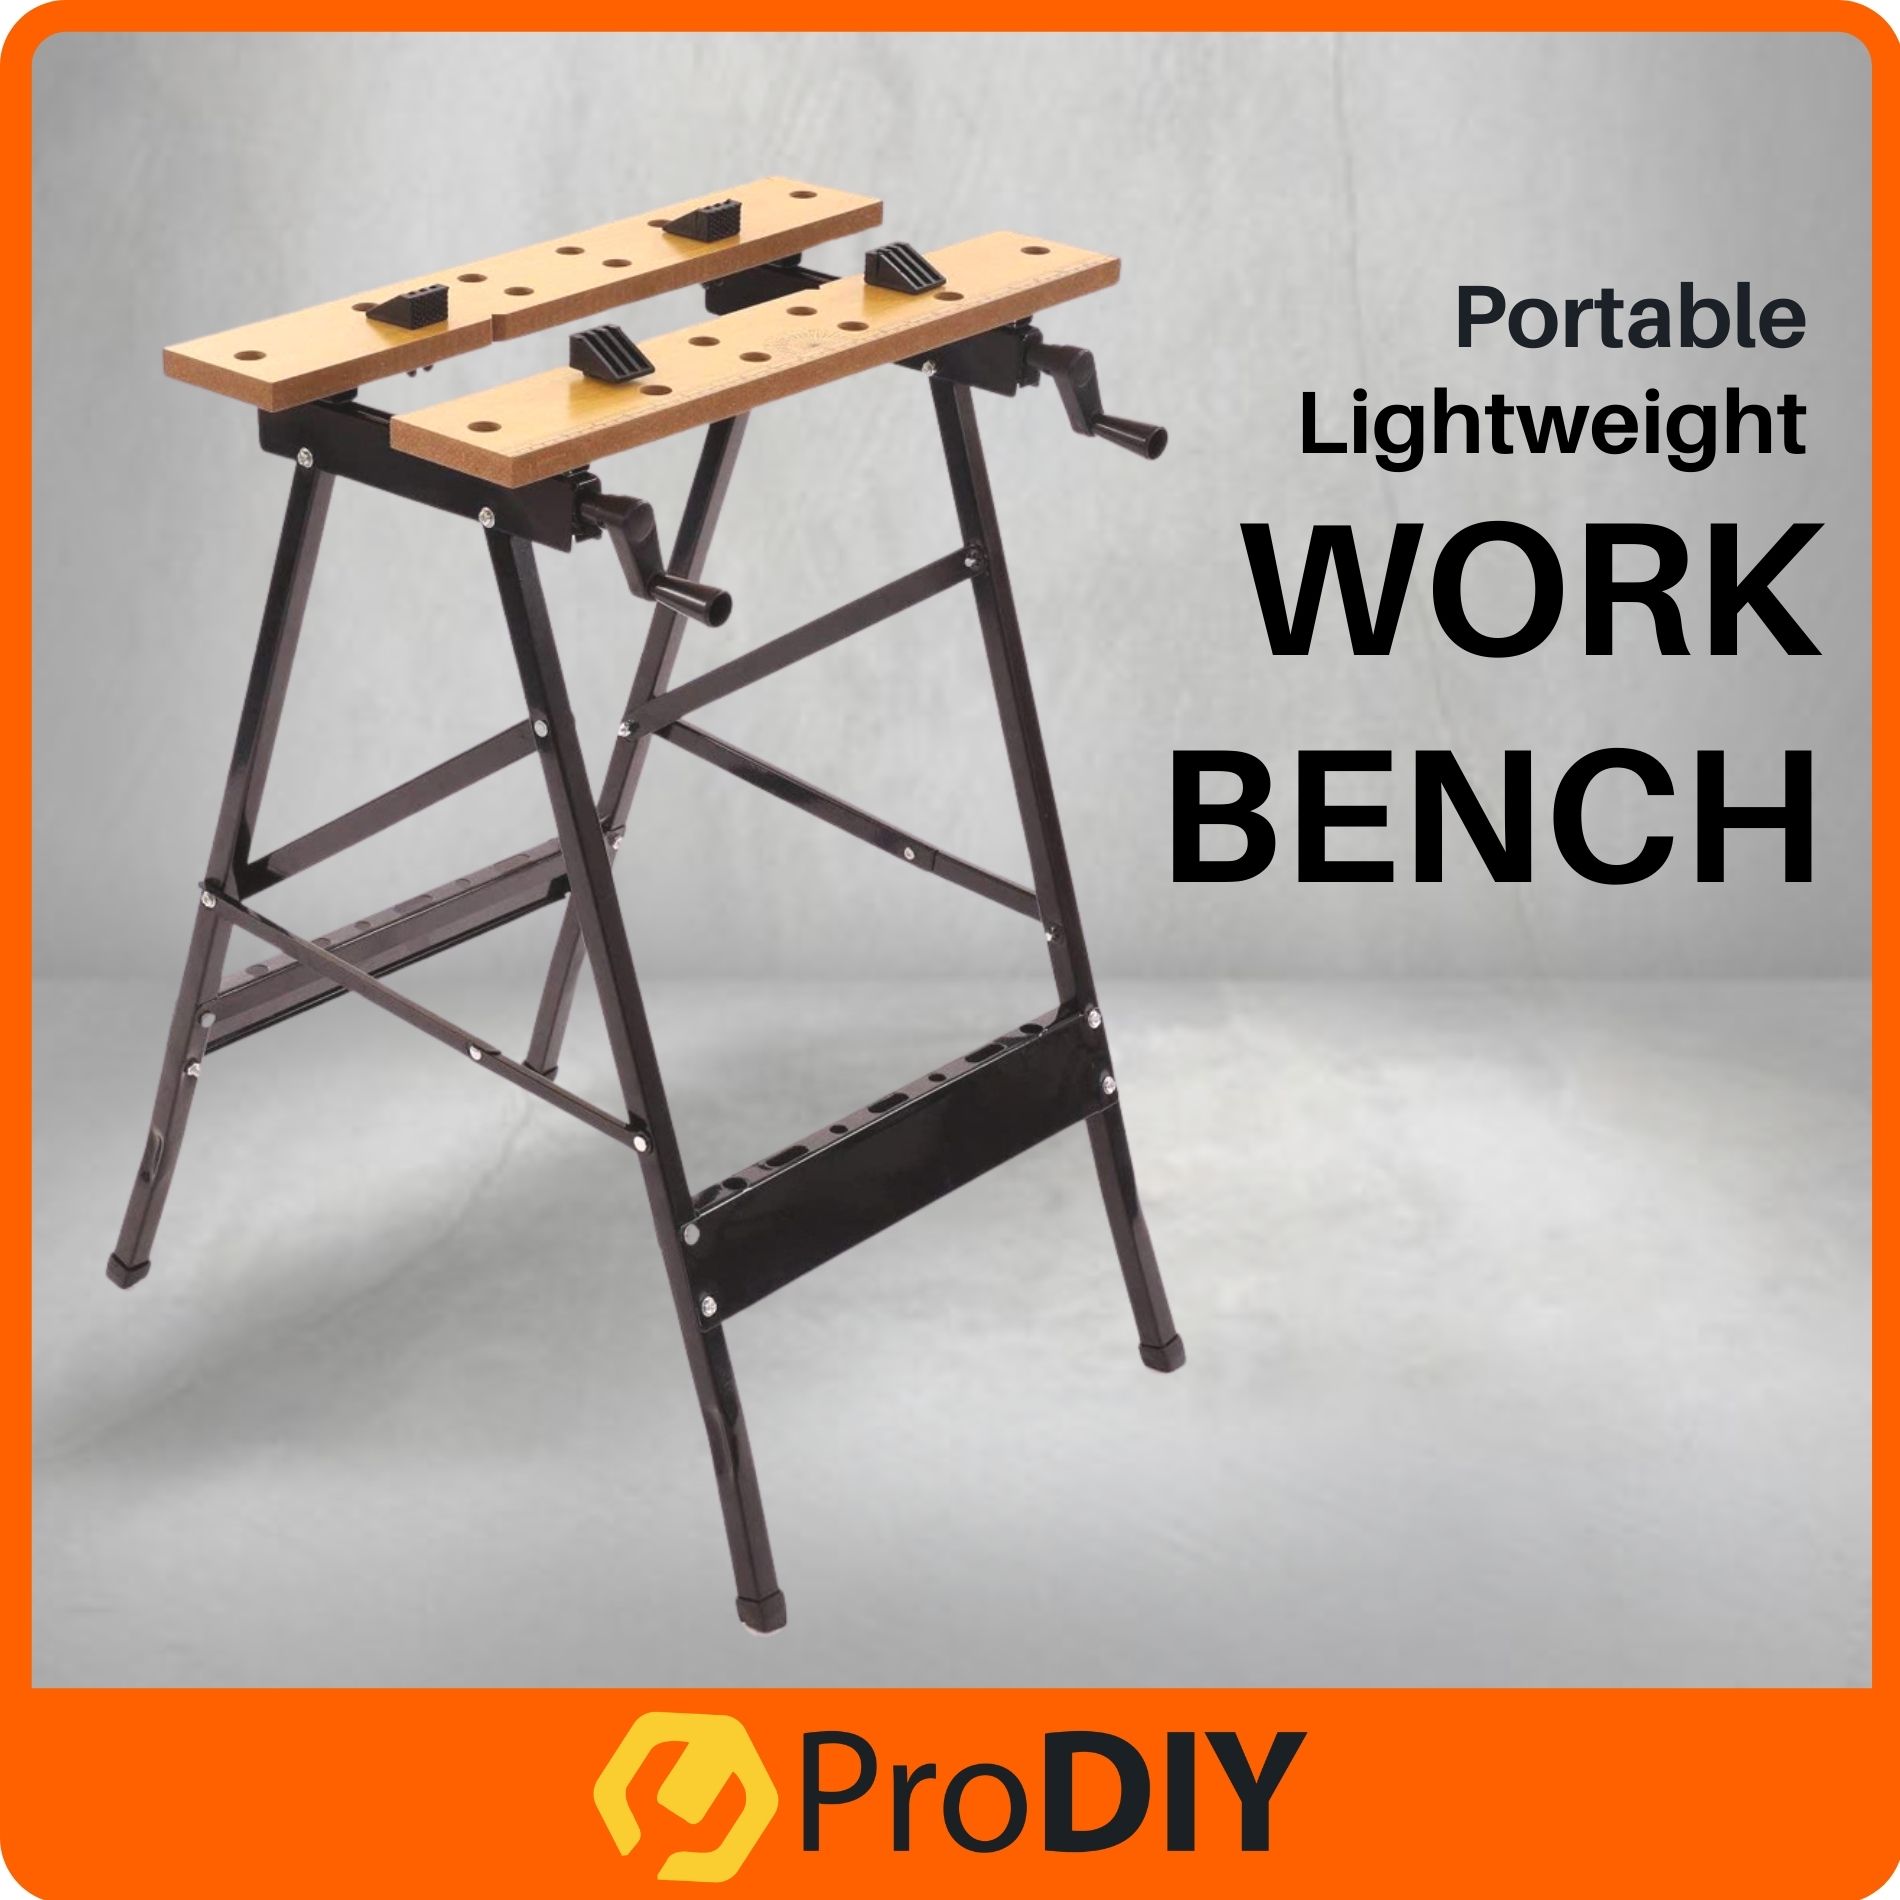 Portable Lightweight Foldable Universal Work Bench Work Station Working Table With Vise Vice Clamp Holder Wood Working